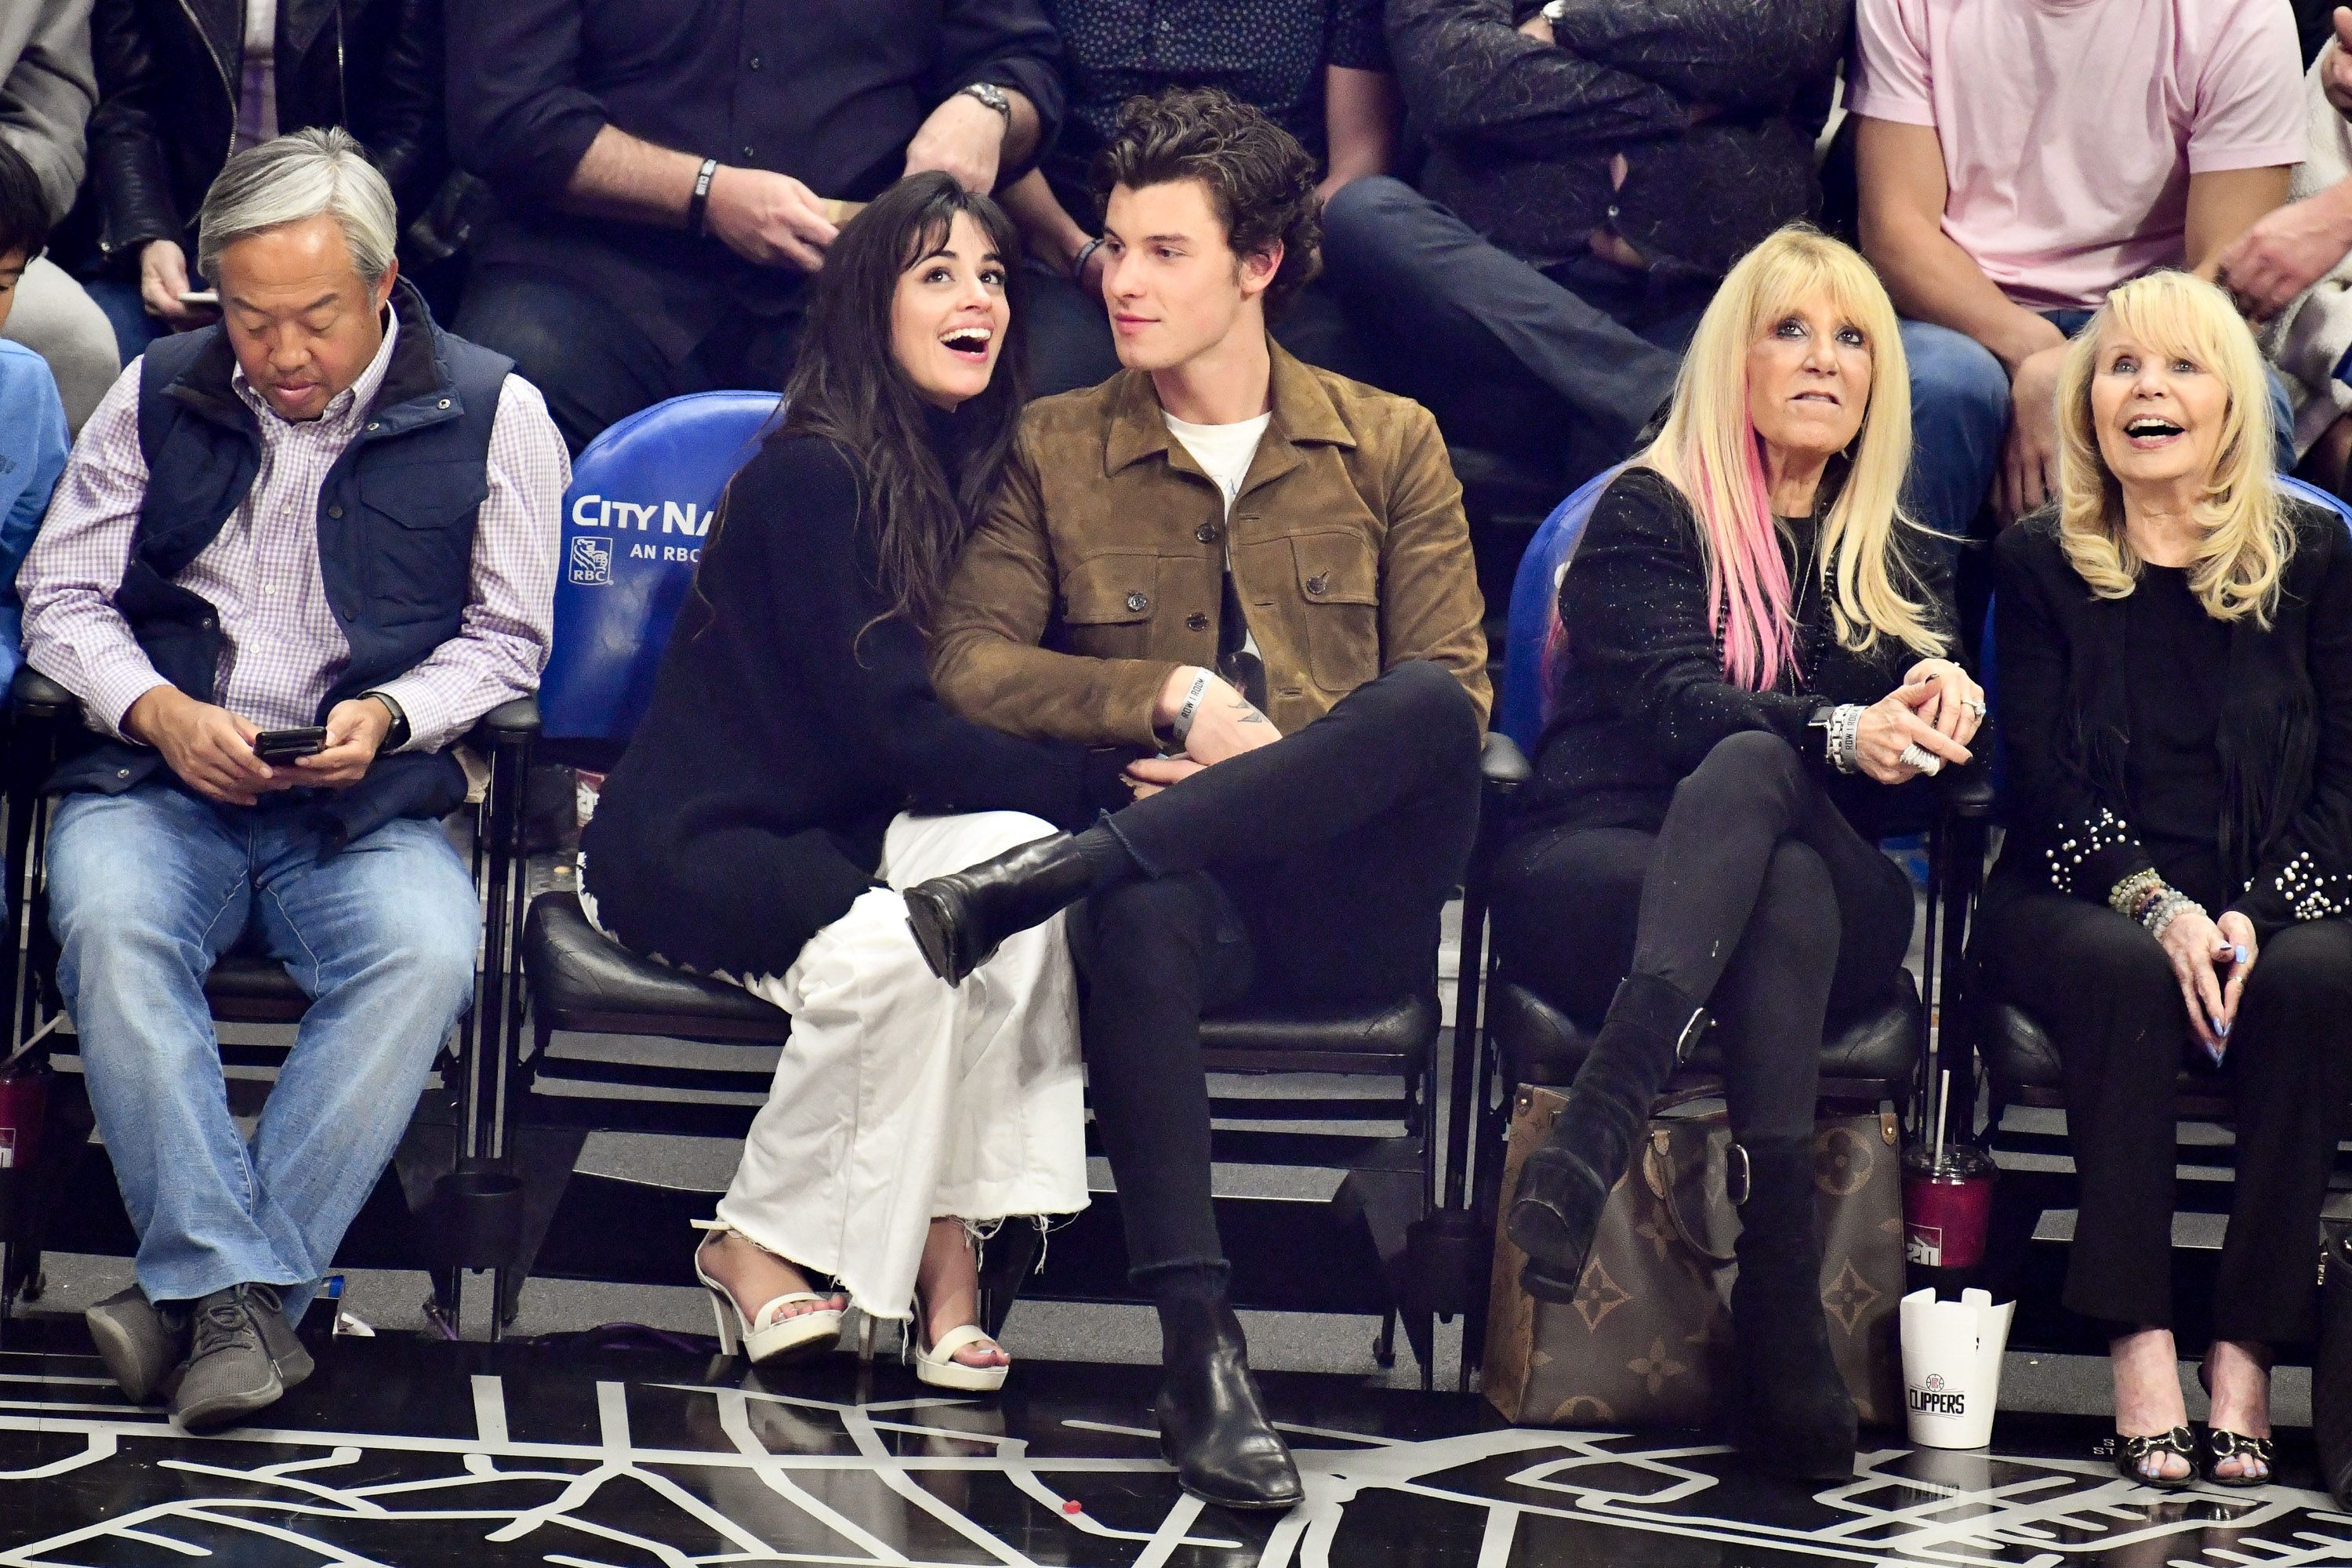 https://hips.hearstapps.com/hmg-prod.s3.amazonaws.com/images/camila-cabello-and-shawn-mendes-attend-a-basketball-game-news-photo-1579291457.jpg